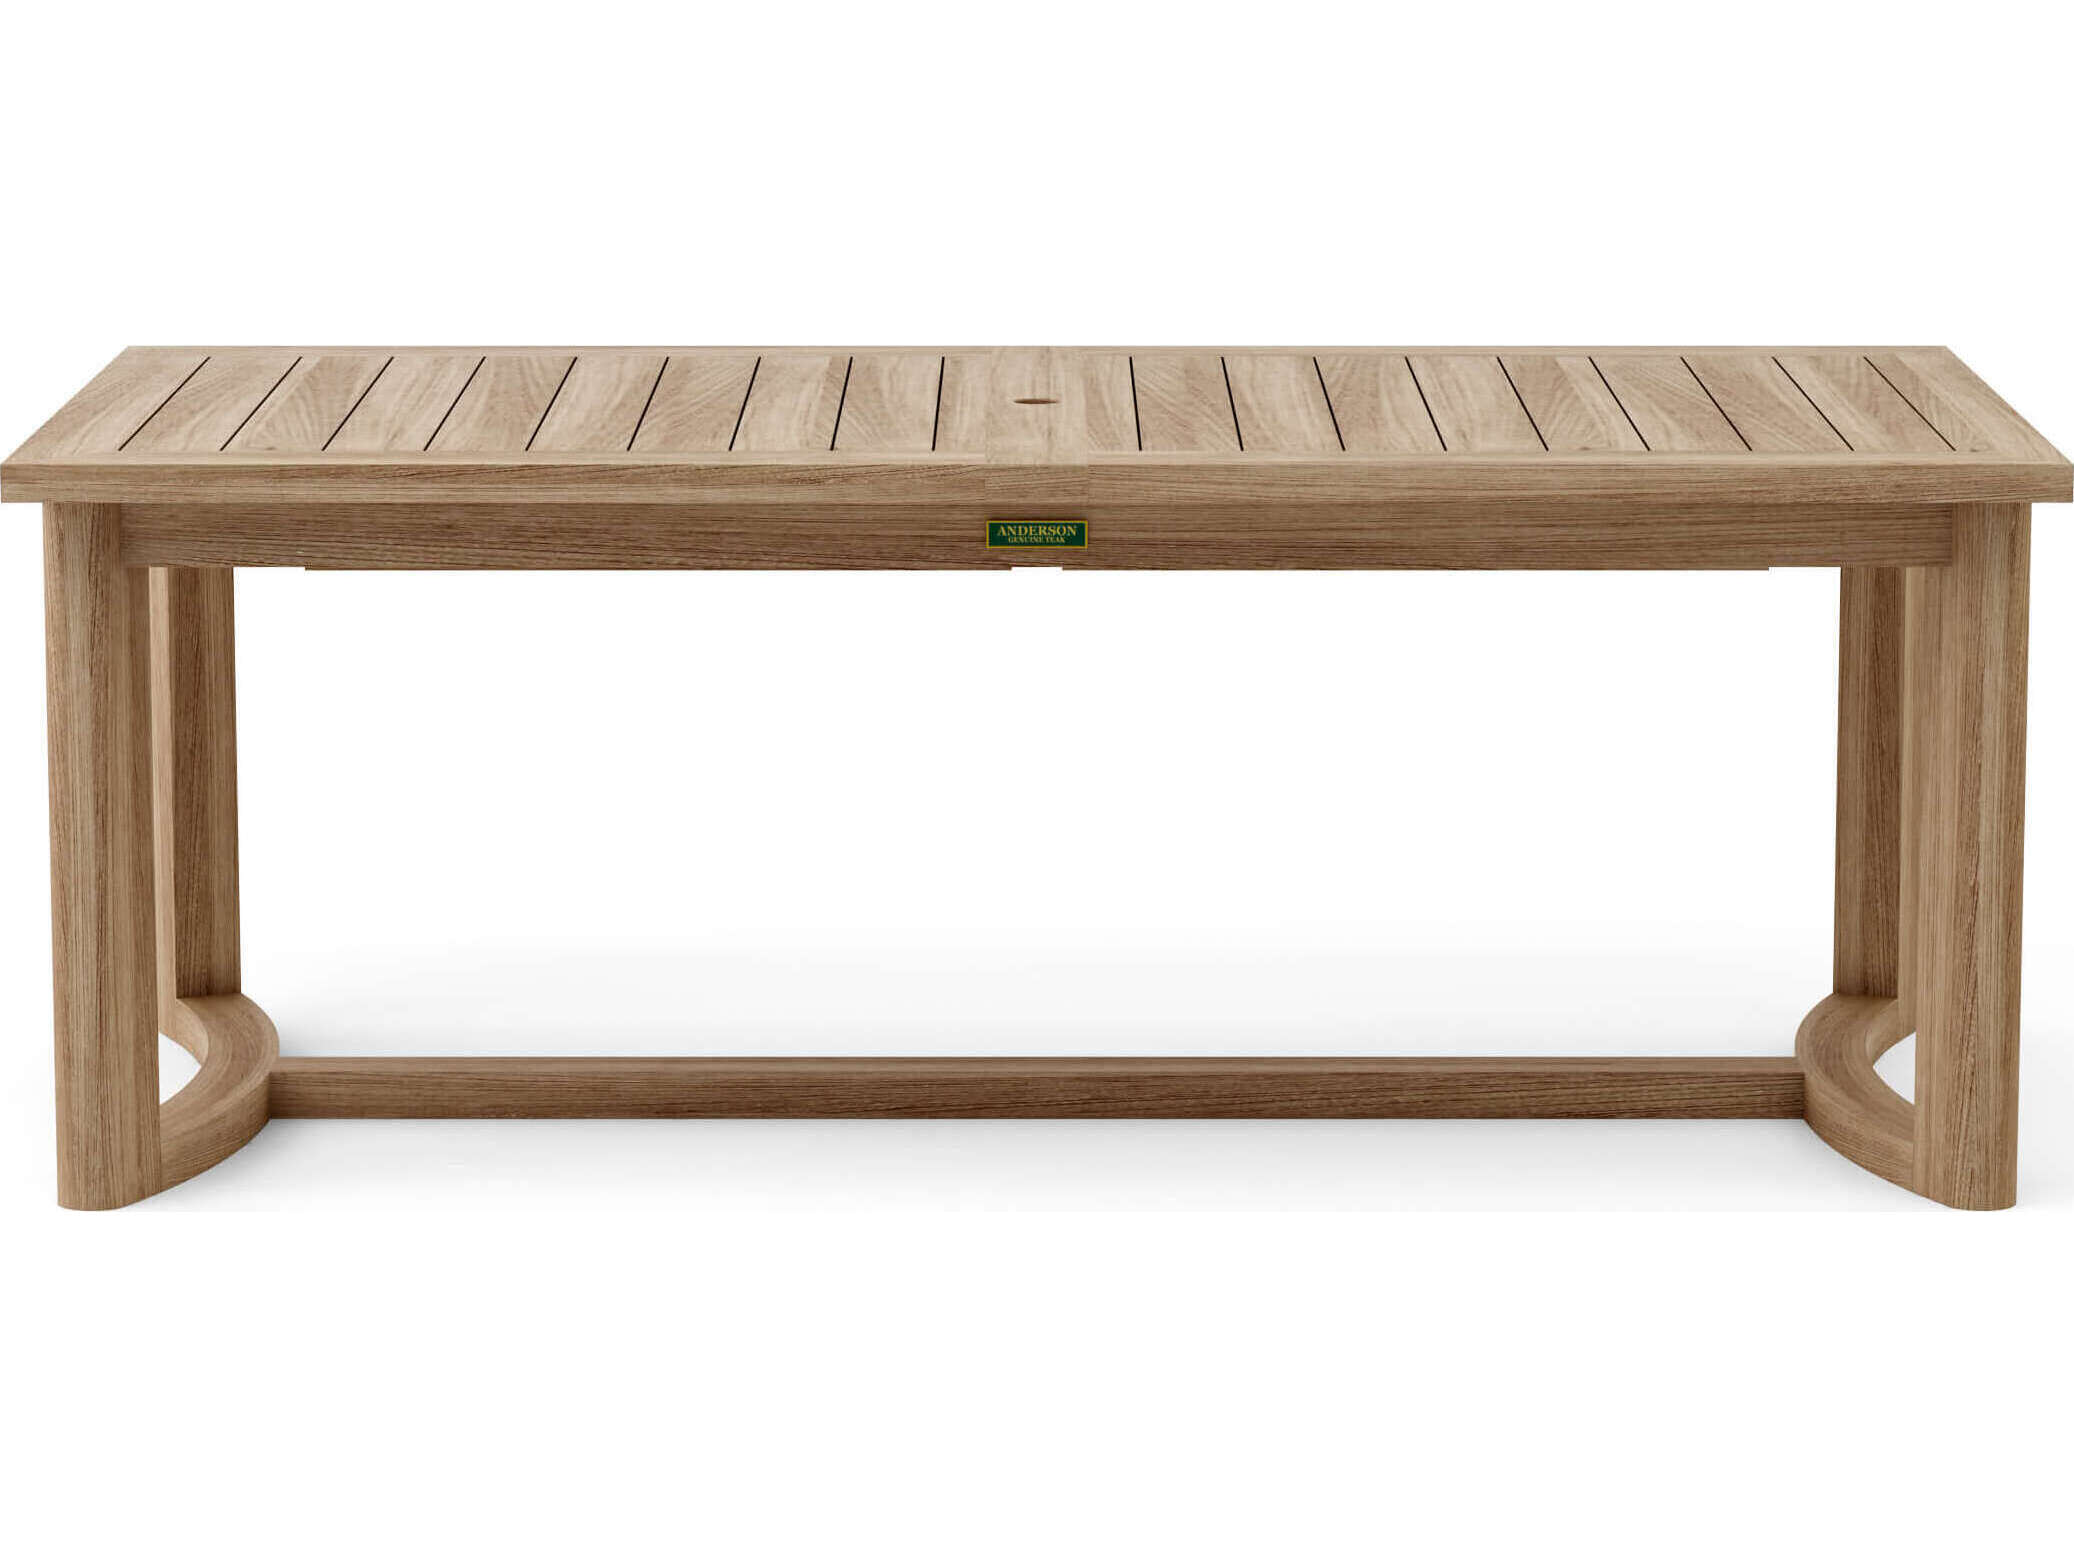 Anderson Teak - Catania Tables - DS-337